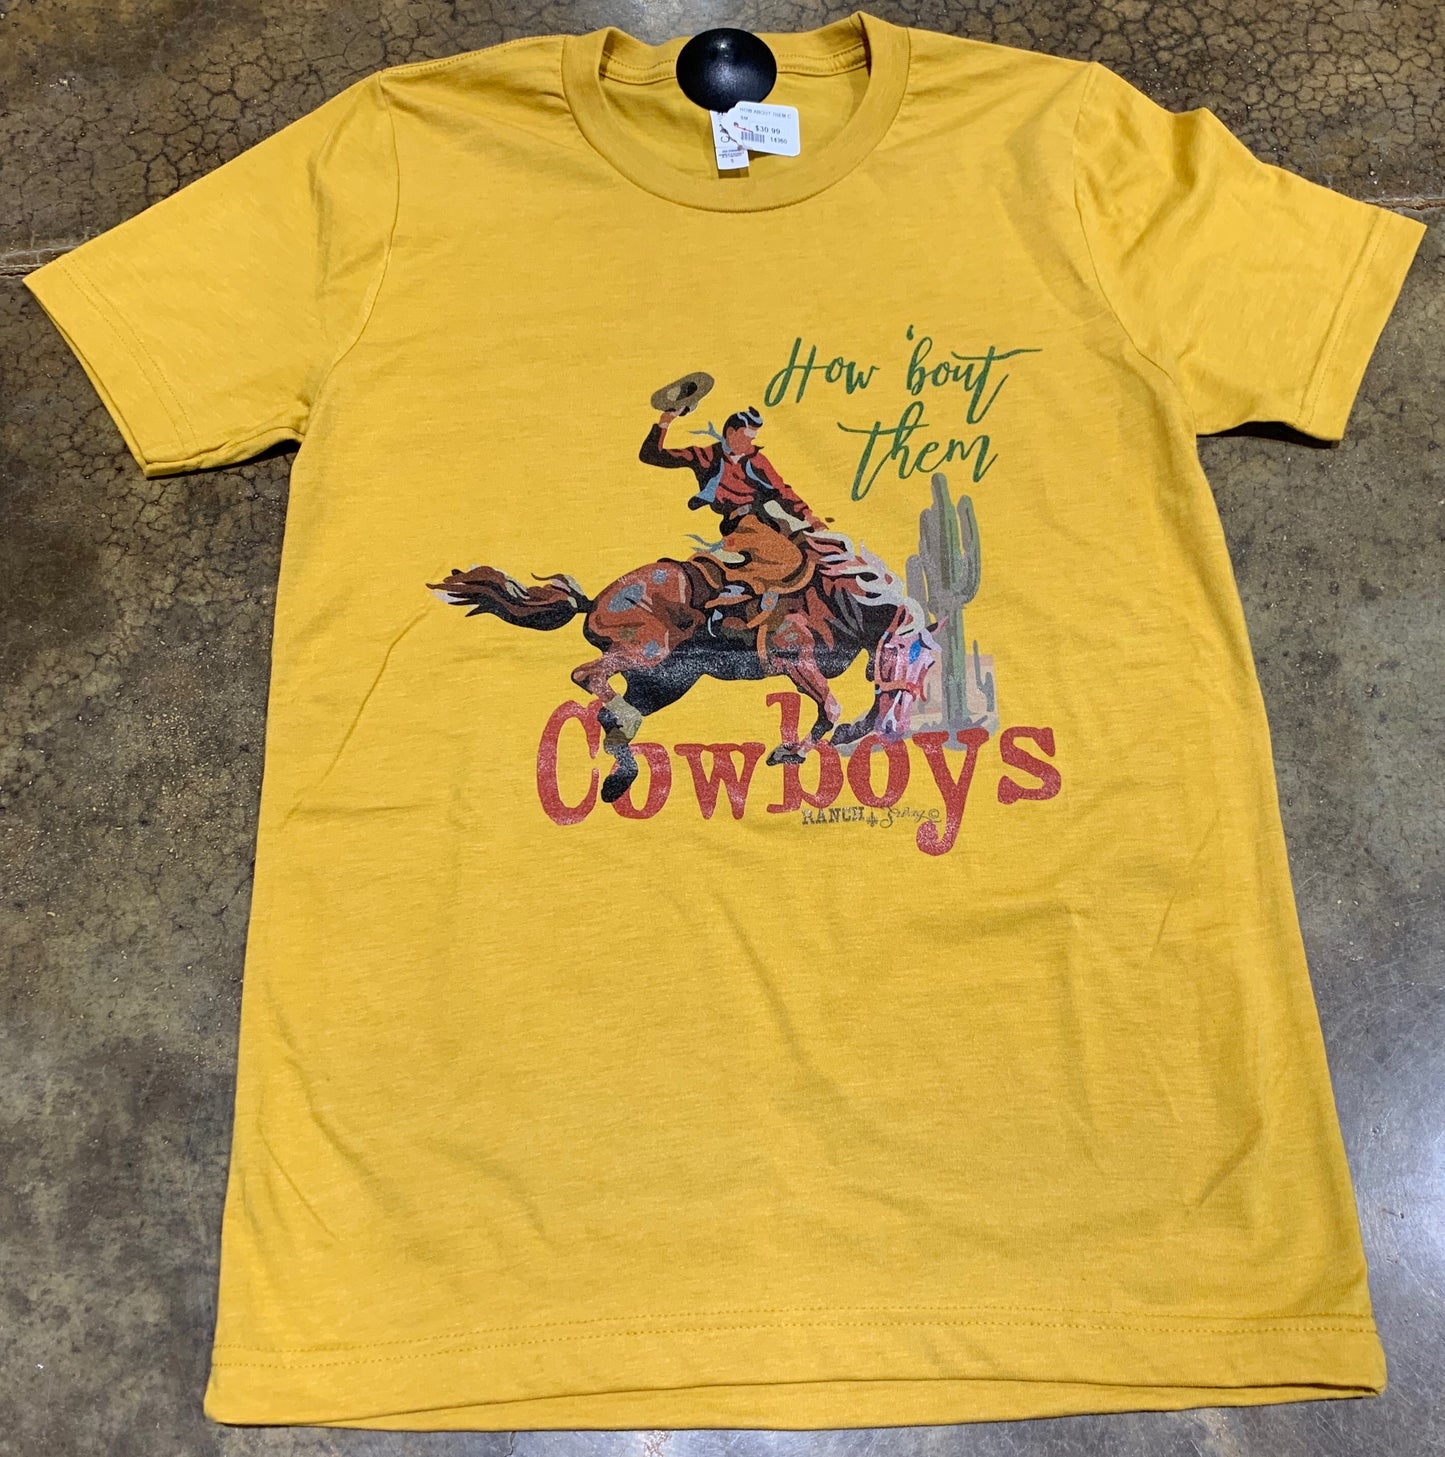 HOW ABOUT THEM COWBOYS? Tee Shirt in Mustard